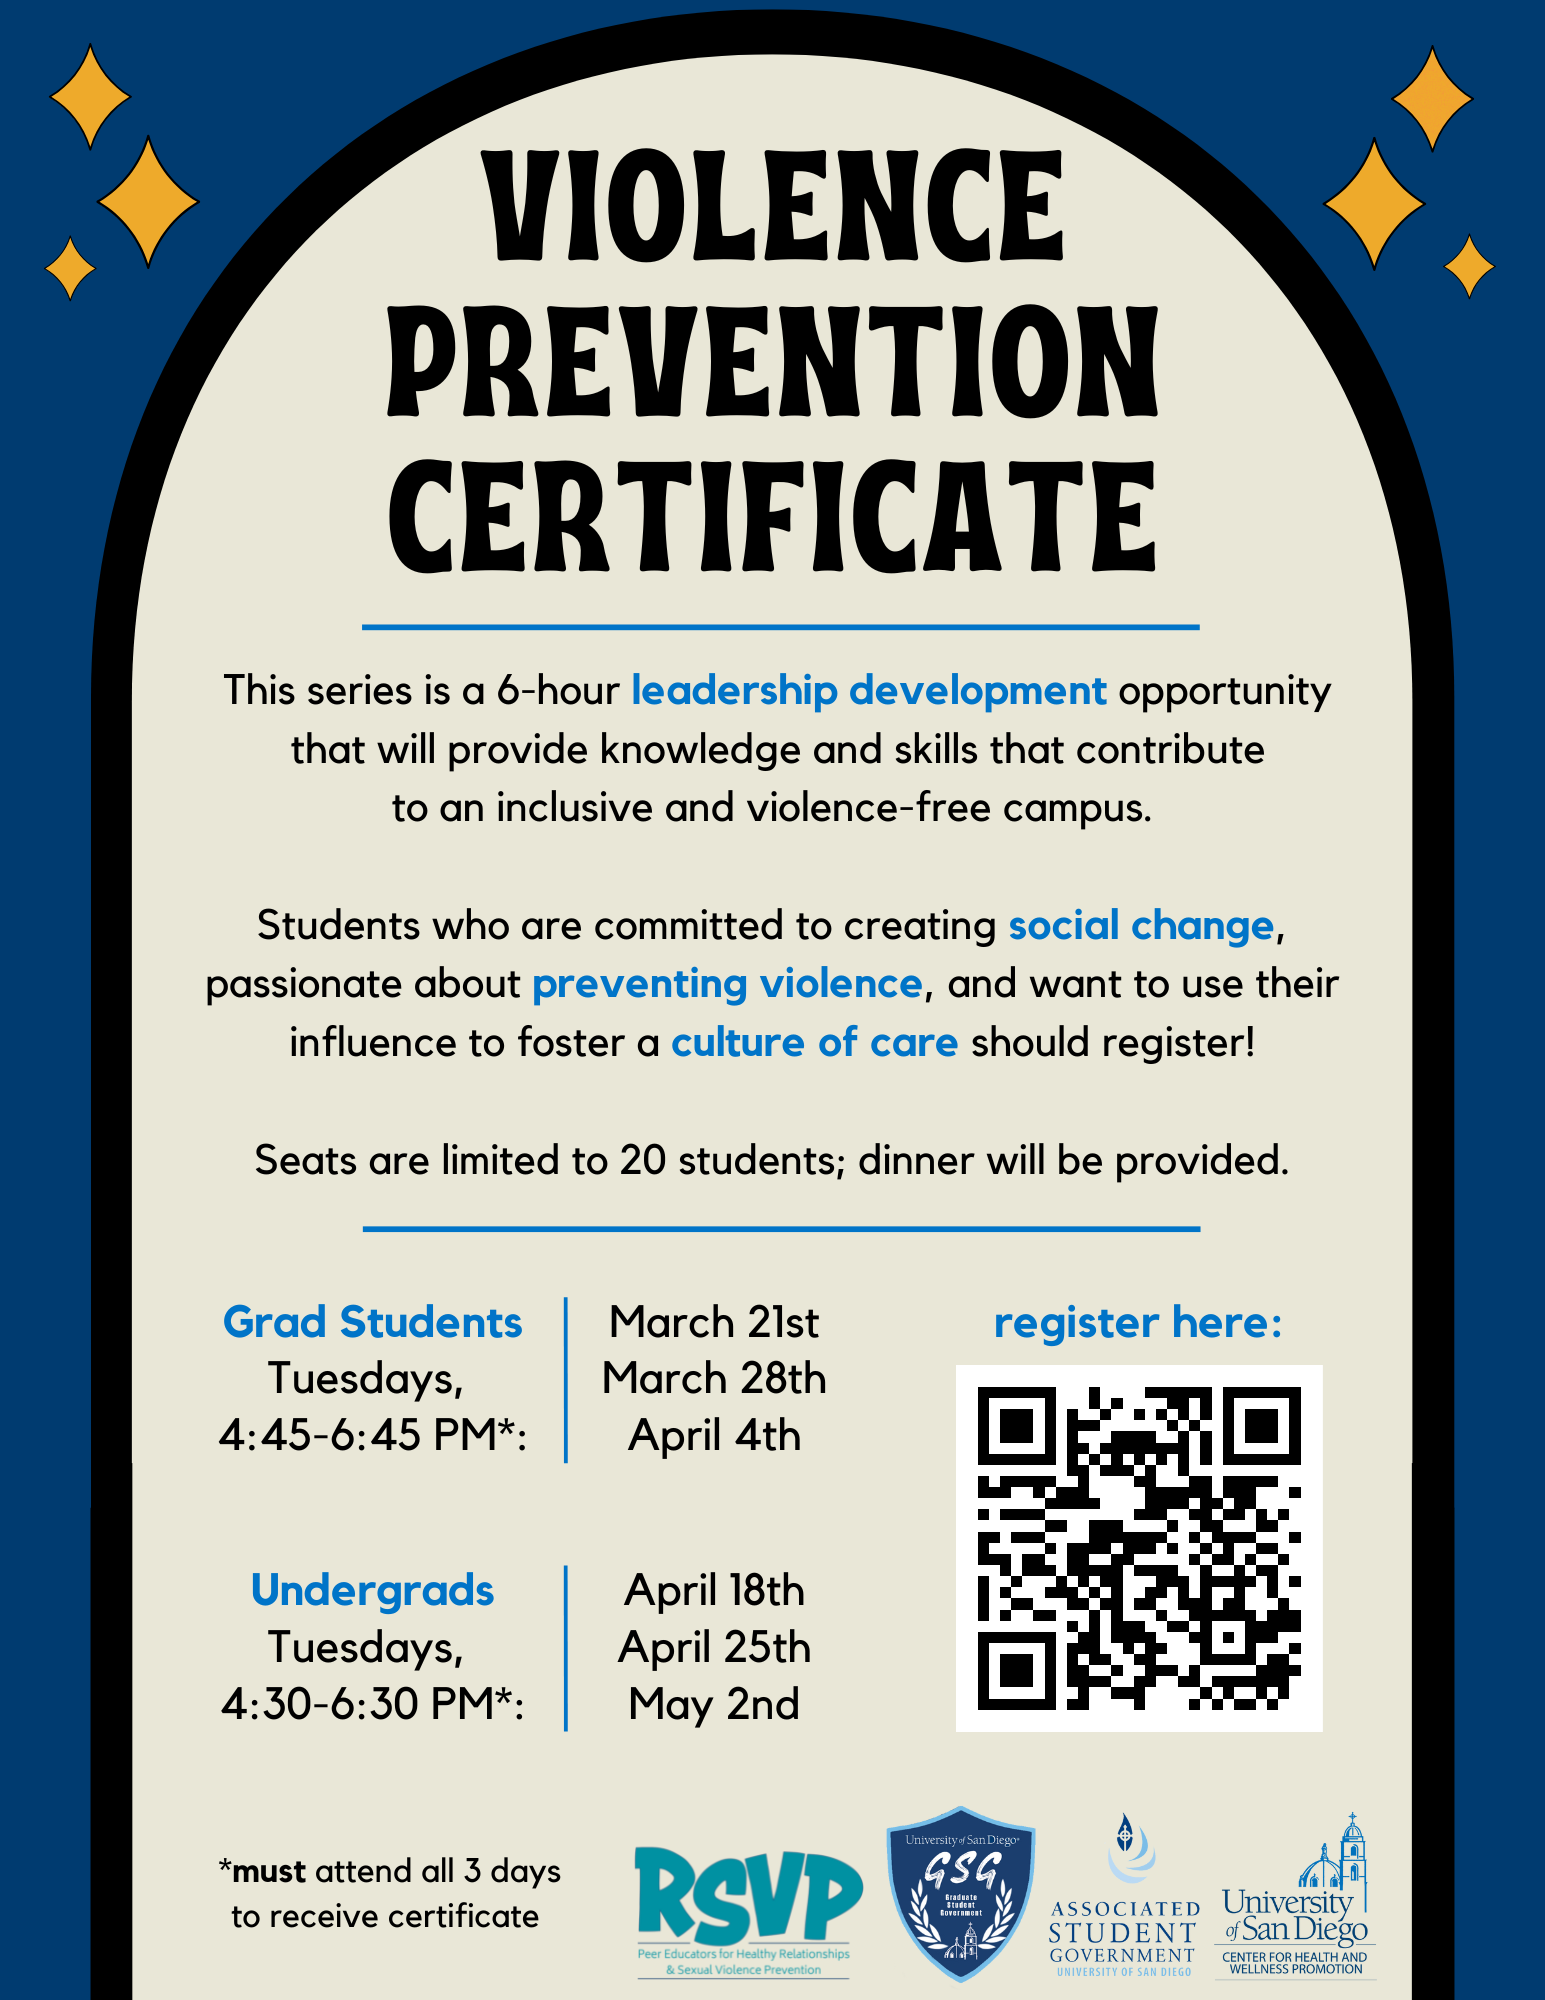 Dark blue background with a cream arch and stars in the upper right and left corners. Text says," Violence Prevention Certificate. This series is a 6-hour leadership development opportunity that will provide knowledge and skills that contribute to an inclusive and violence-free campus. Students who are committed to creating social change, passionate about preventing violence, and want to use their influence to foster a culture of care should register! Seats are limited to 20 students; dinner will be provided. Grad Students: Tuesdays, 4:45-6:45 PM*: March 21st, March 28th, April 4th; Undergrads: Tuesdays, 4:30-6:30 PM*: April 18th, April 25th, May 2nd.*Must attend all 3 days to receive certificate."